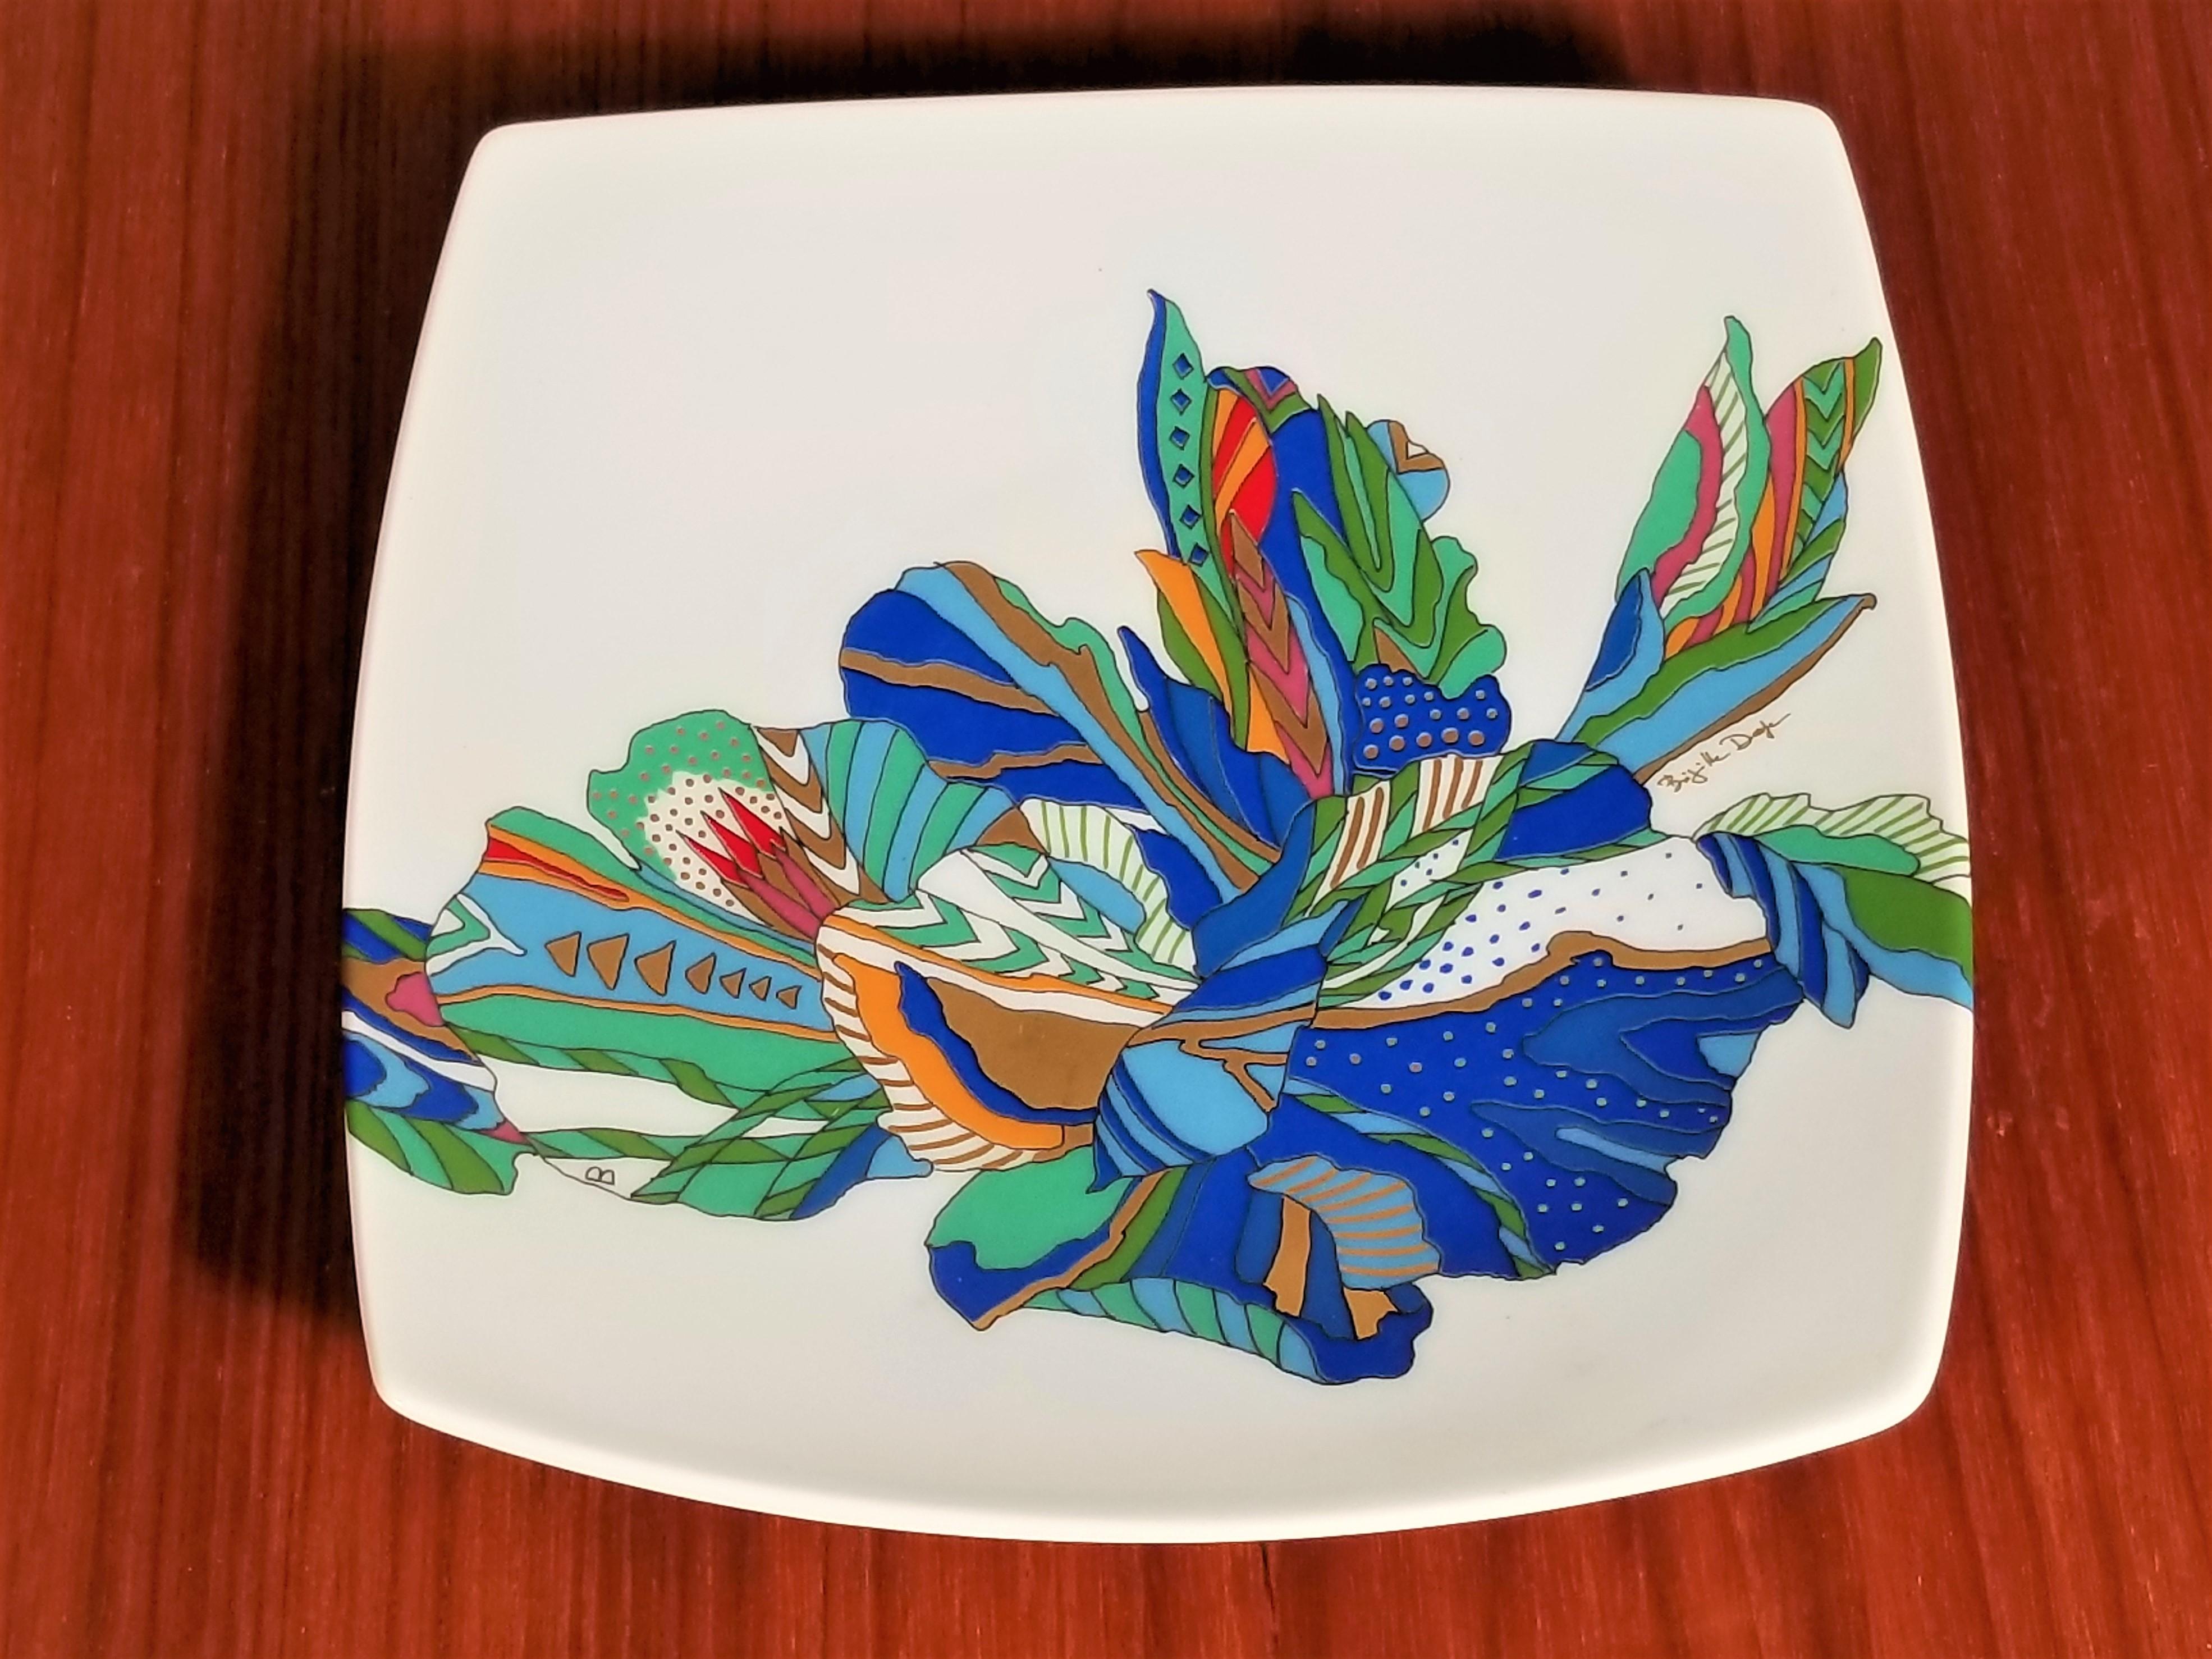 Mid Century Artist signed Brigette Deoge for Rosenthal, Germany. Gorgeous brightly colored design on white porcelain. 
Excellent Condition 